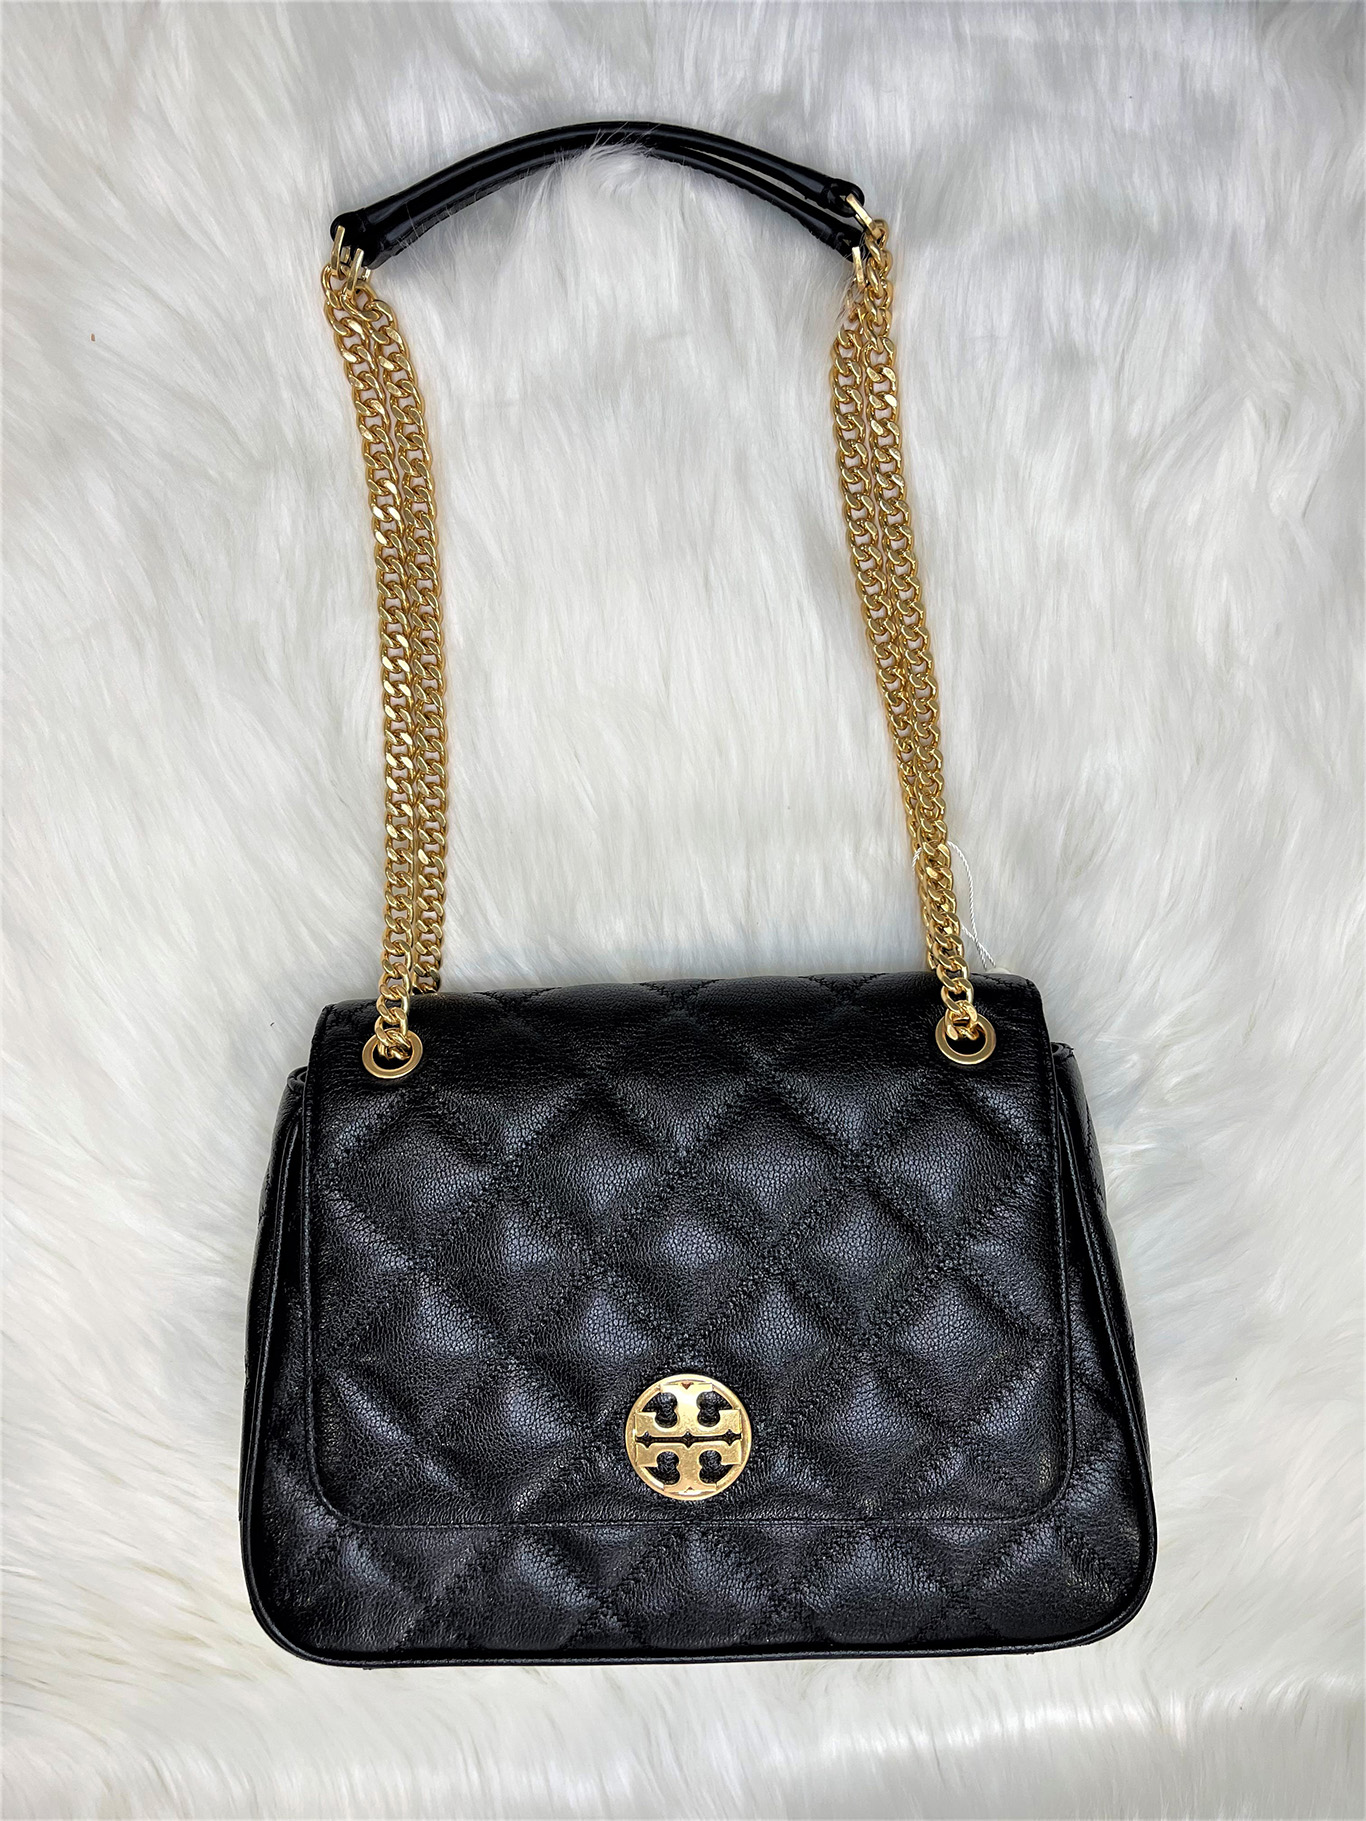 BEST & WORST TORY BURCH HANDBAGS TO PURCHASE 